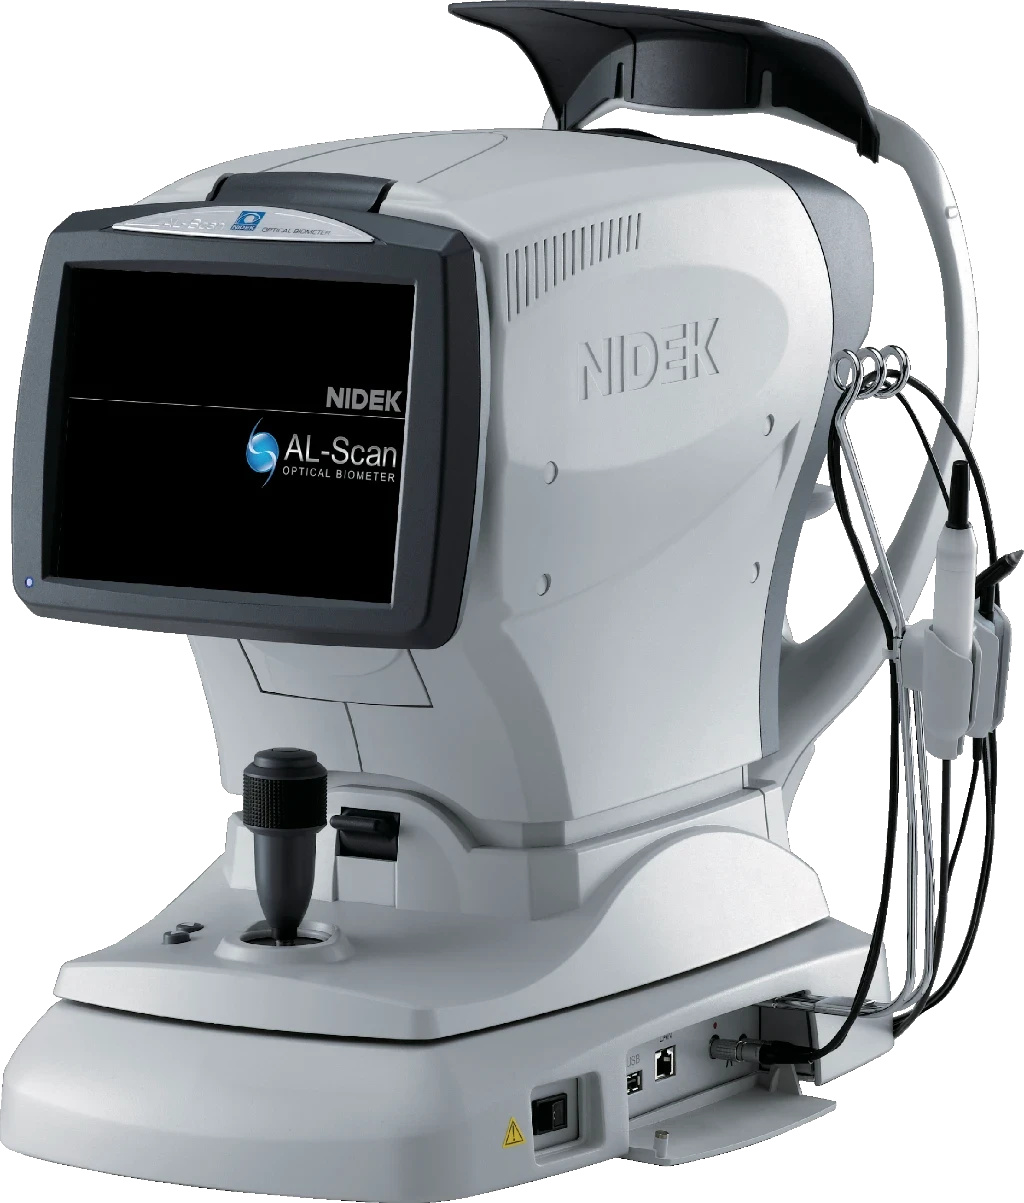 A Close-Up Of A Nidek Al-Scan Optical Biometer. The Device Is Gray And Features A Monitor Displaying The Nidek Logo And Model Name. Various Cables And Connectors Are Attached, And There Is A Joystick For Control On The Base.